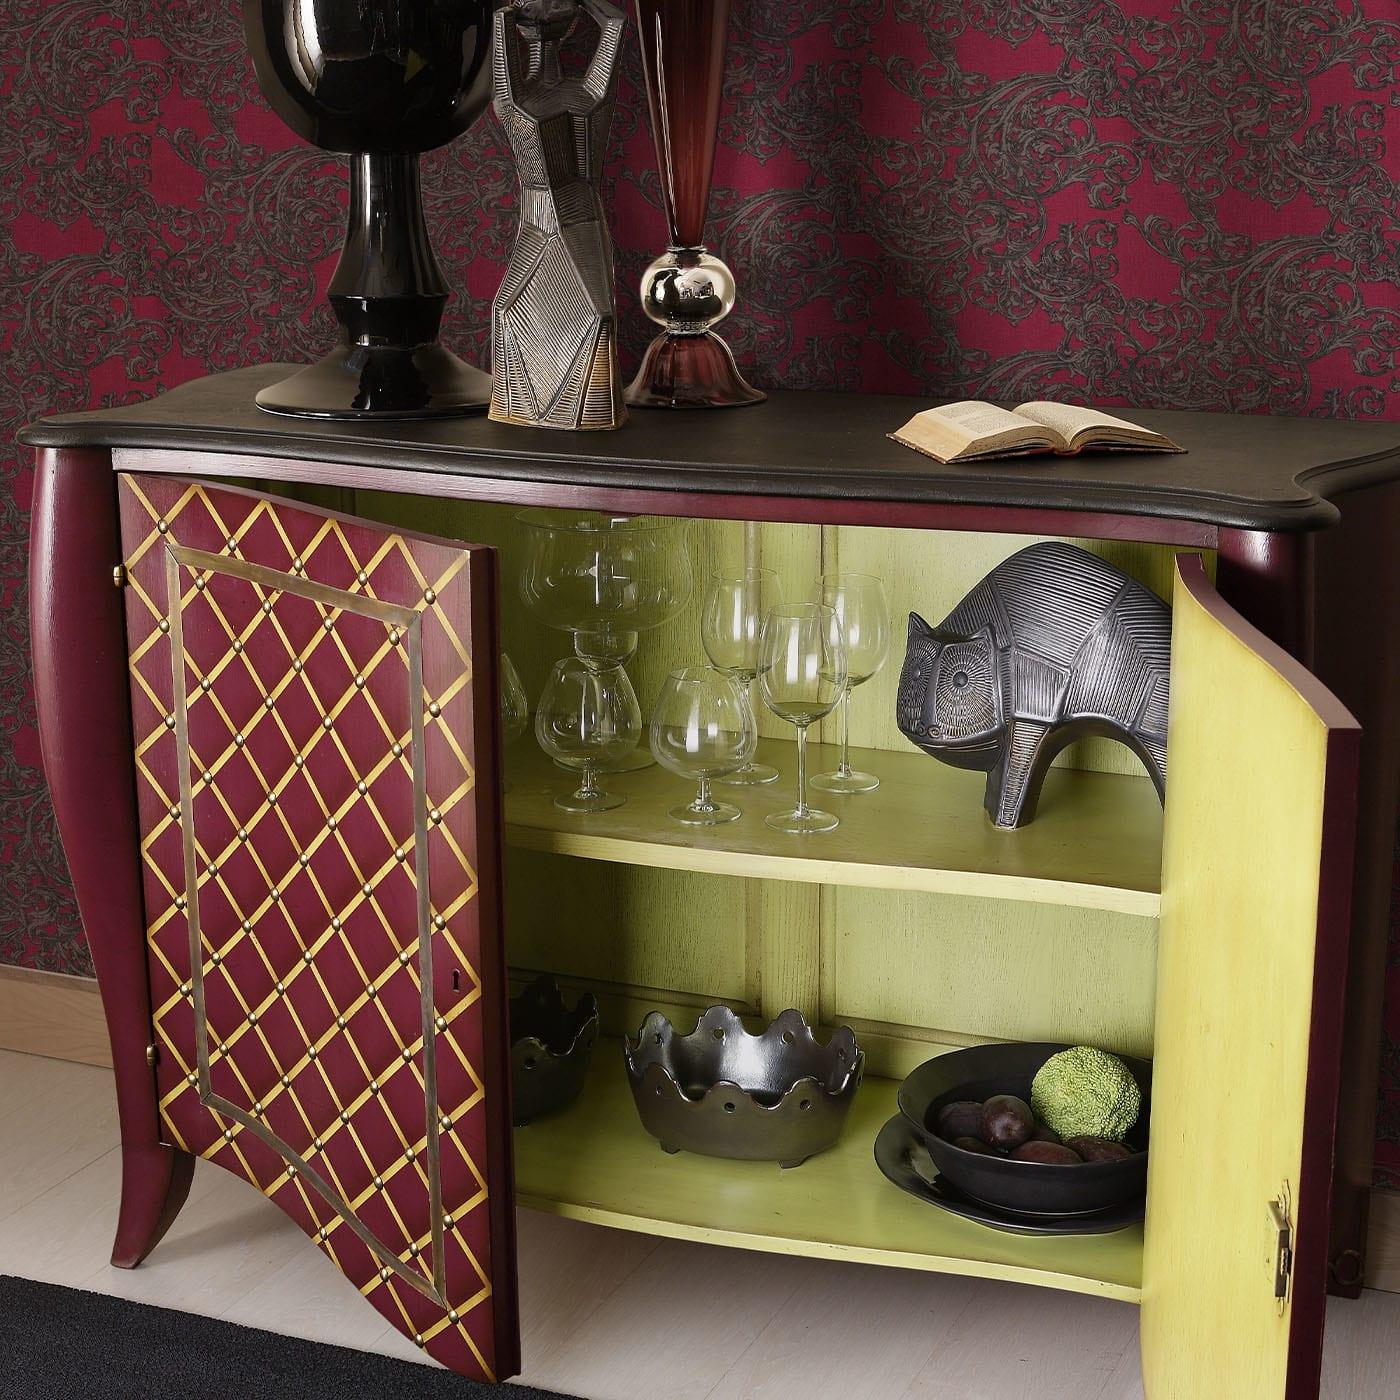 Marked by a yellow diamond pattern accented with studs, this sideboard boasts a wooden frame traced by sinuous and harmonious lines and finished in a glamorous tone of purple. Brass frames accent the two doors, which open to reveal a wide storage